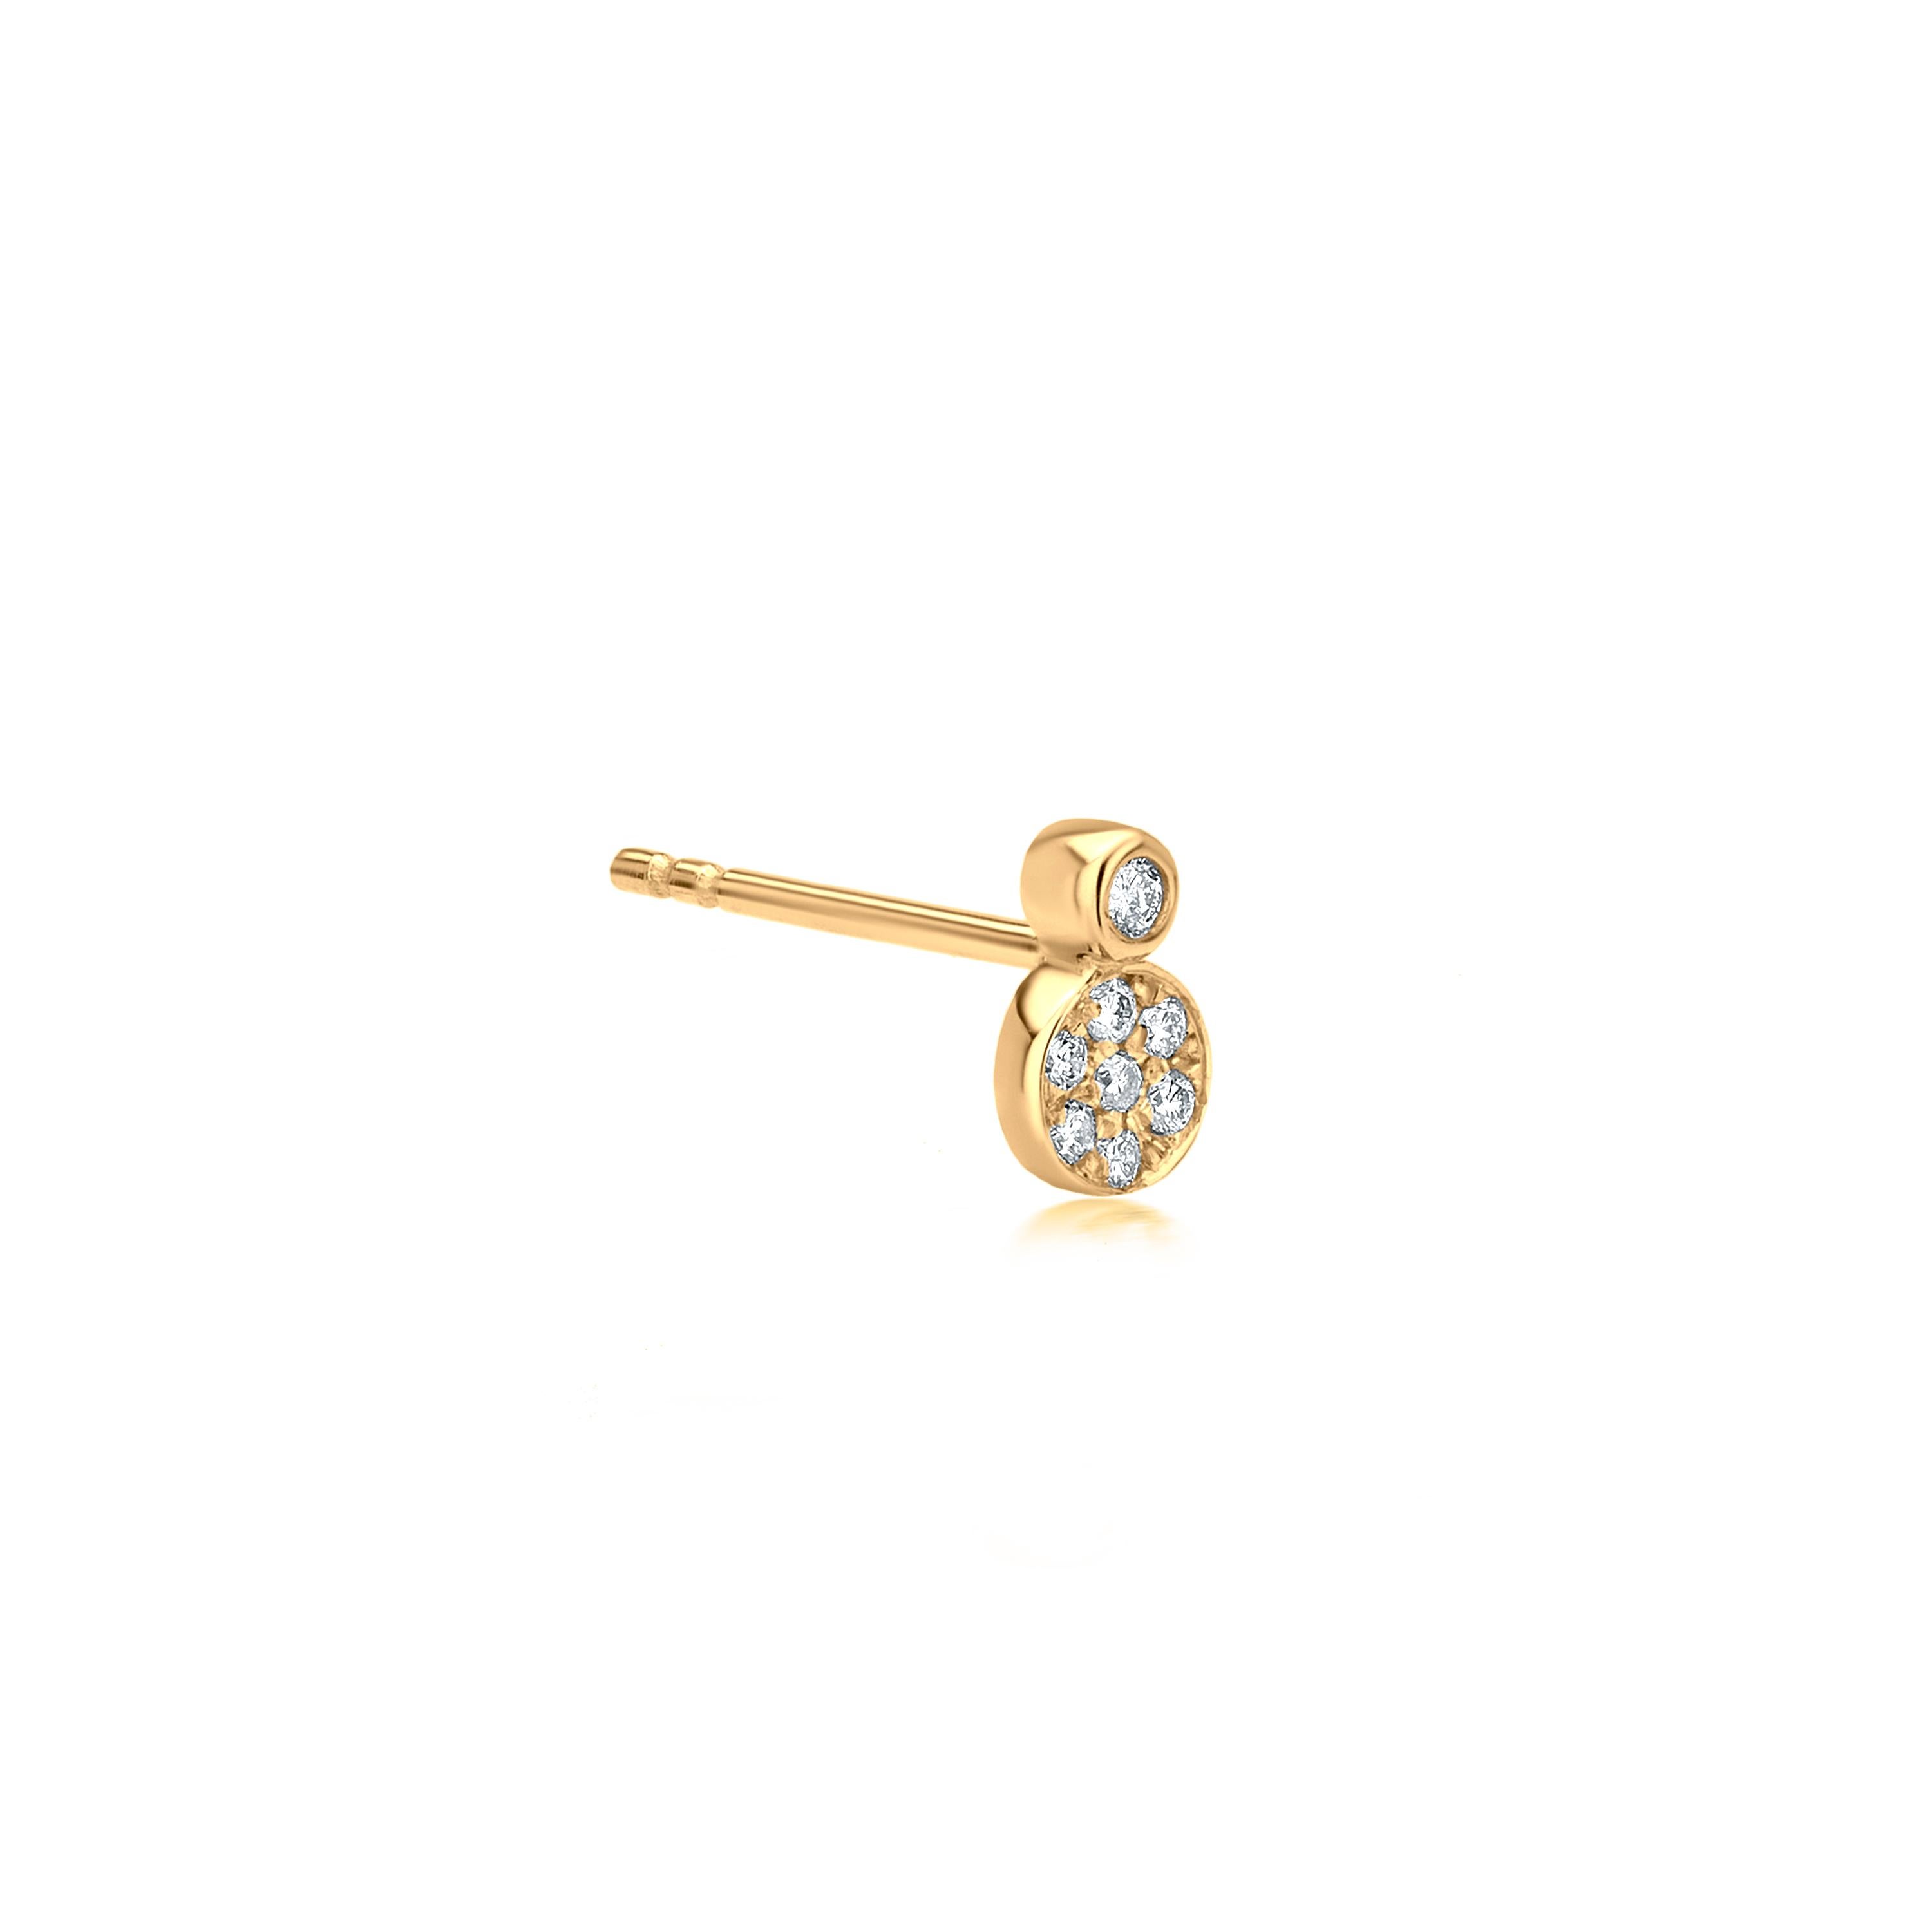 Contemporary Luxle Diamond Cluster Stud Earrings in 18k Yellow Gold